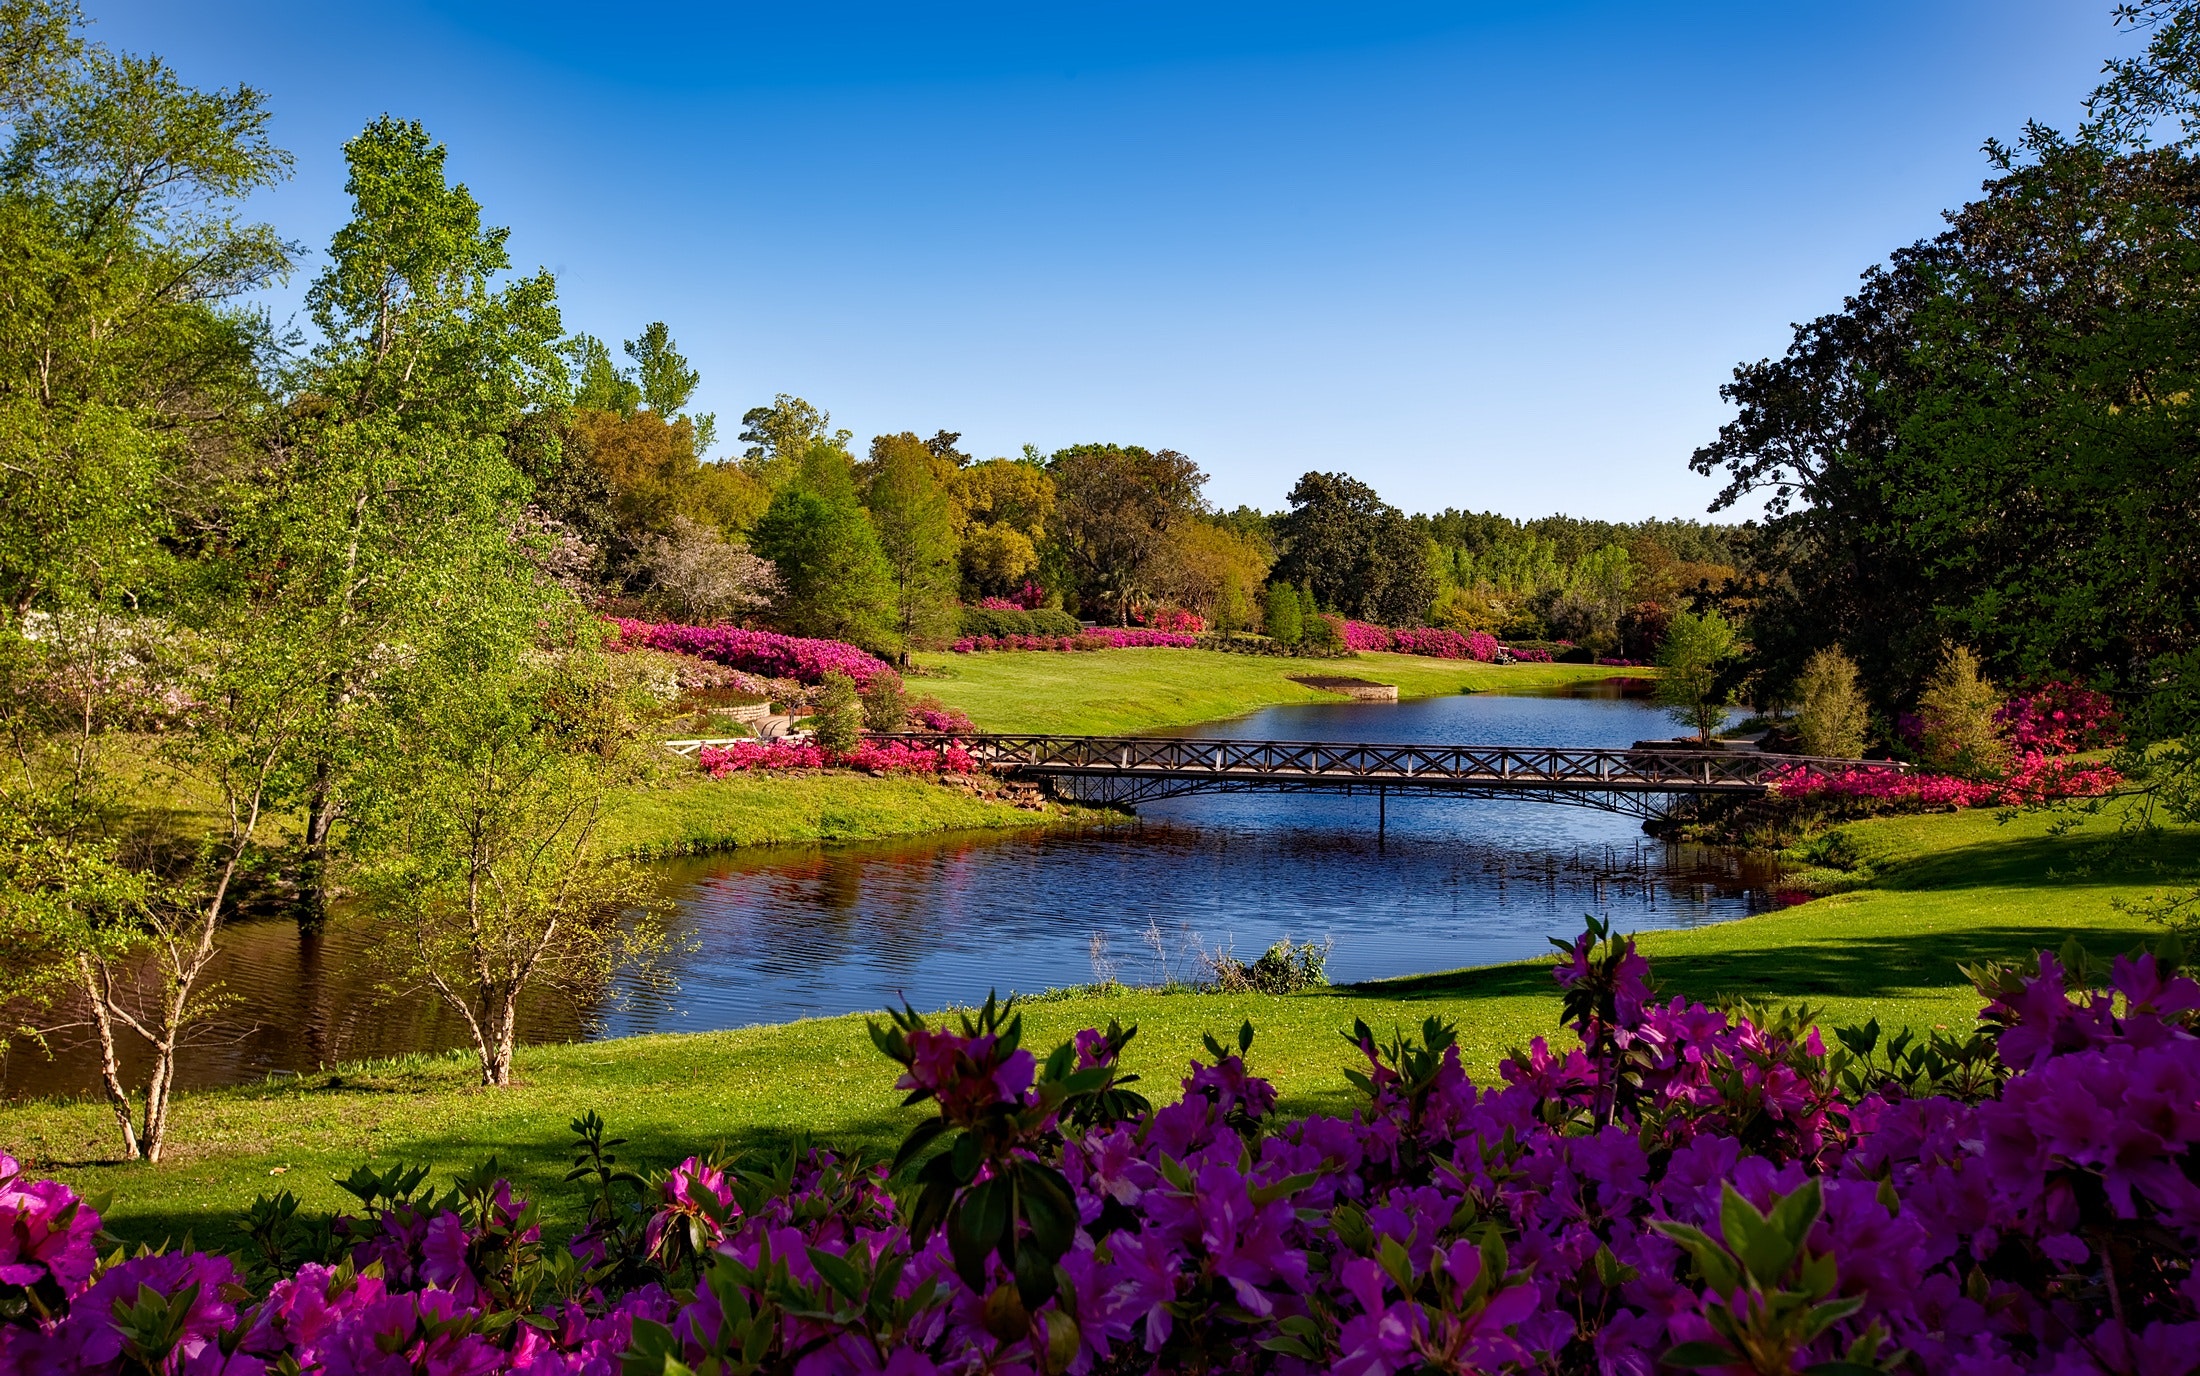 A golf course with a bridge and purple flowers, embracing the beauty of seasons.